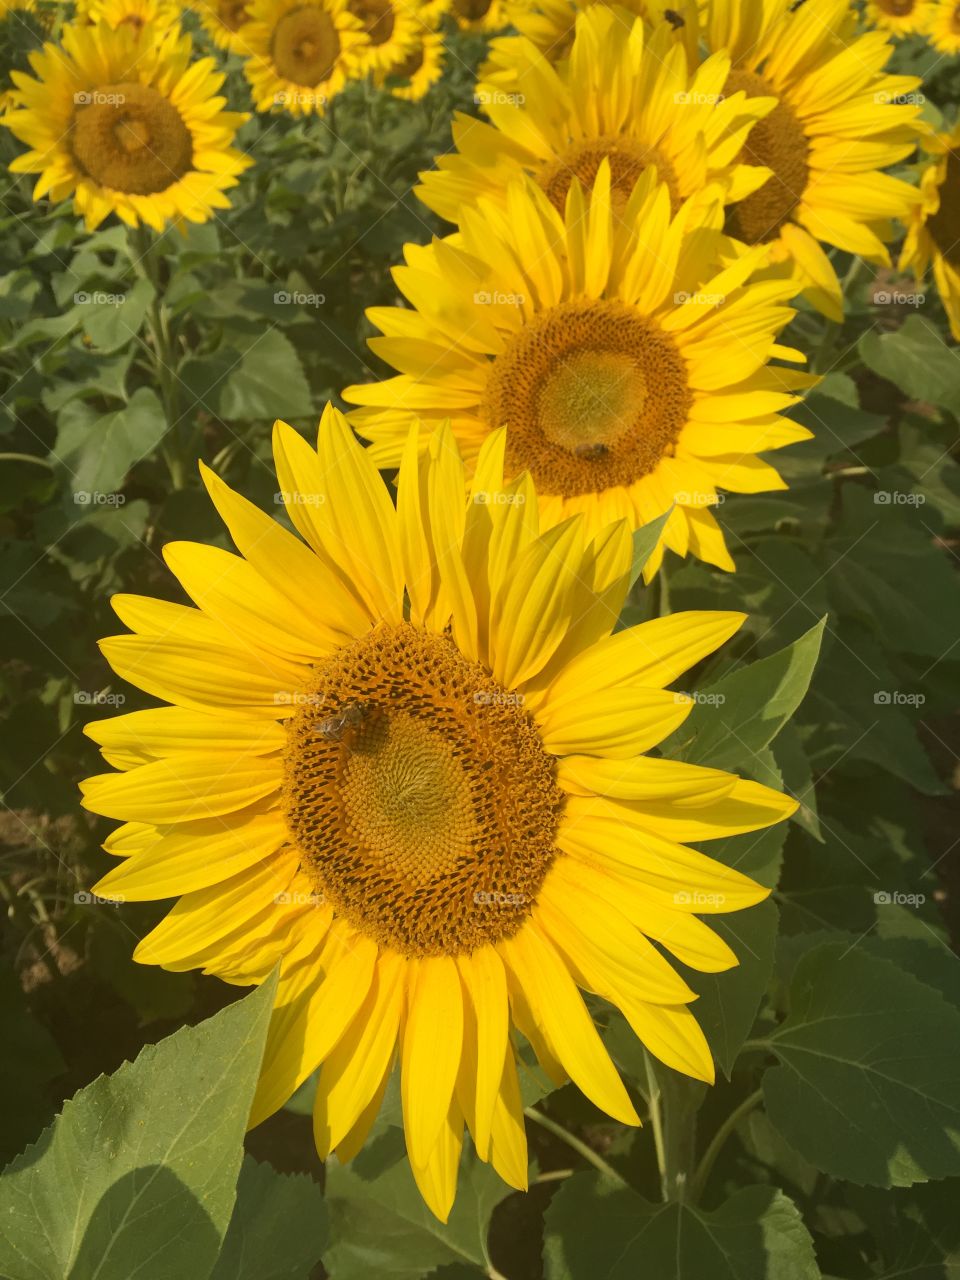 Sunflowers and bees